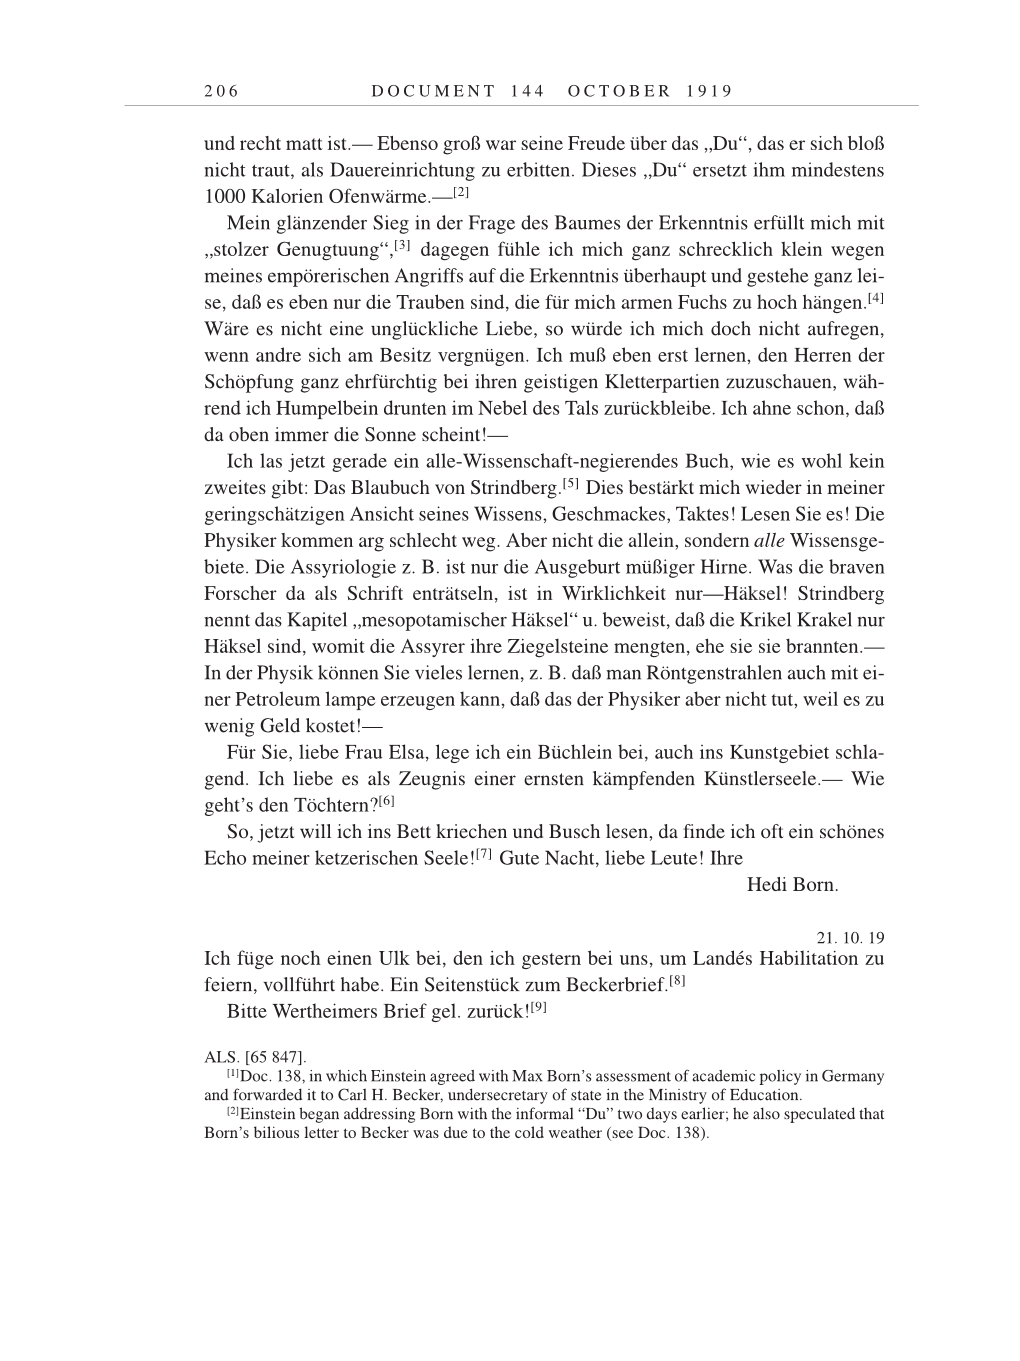 Volume 9: The Berlin Years: Correspondence January 1919-April 1920 page 206